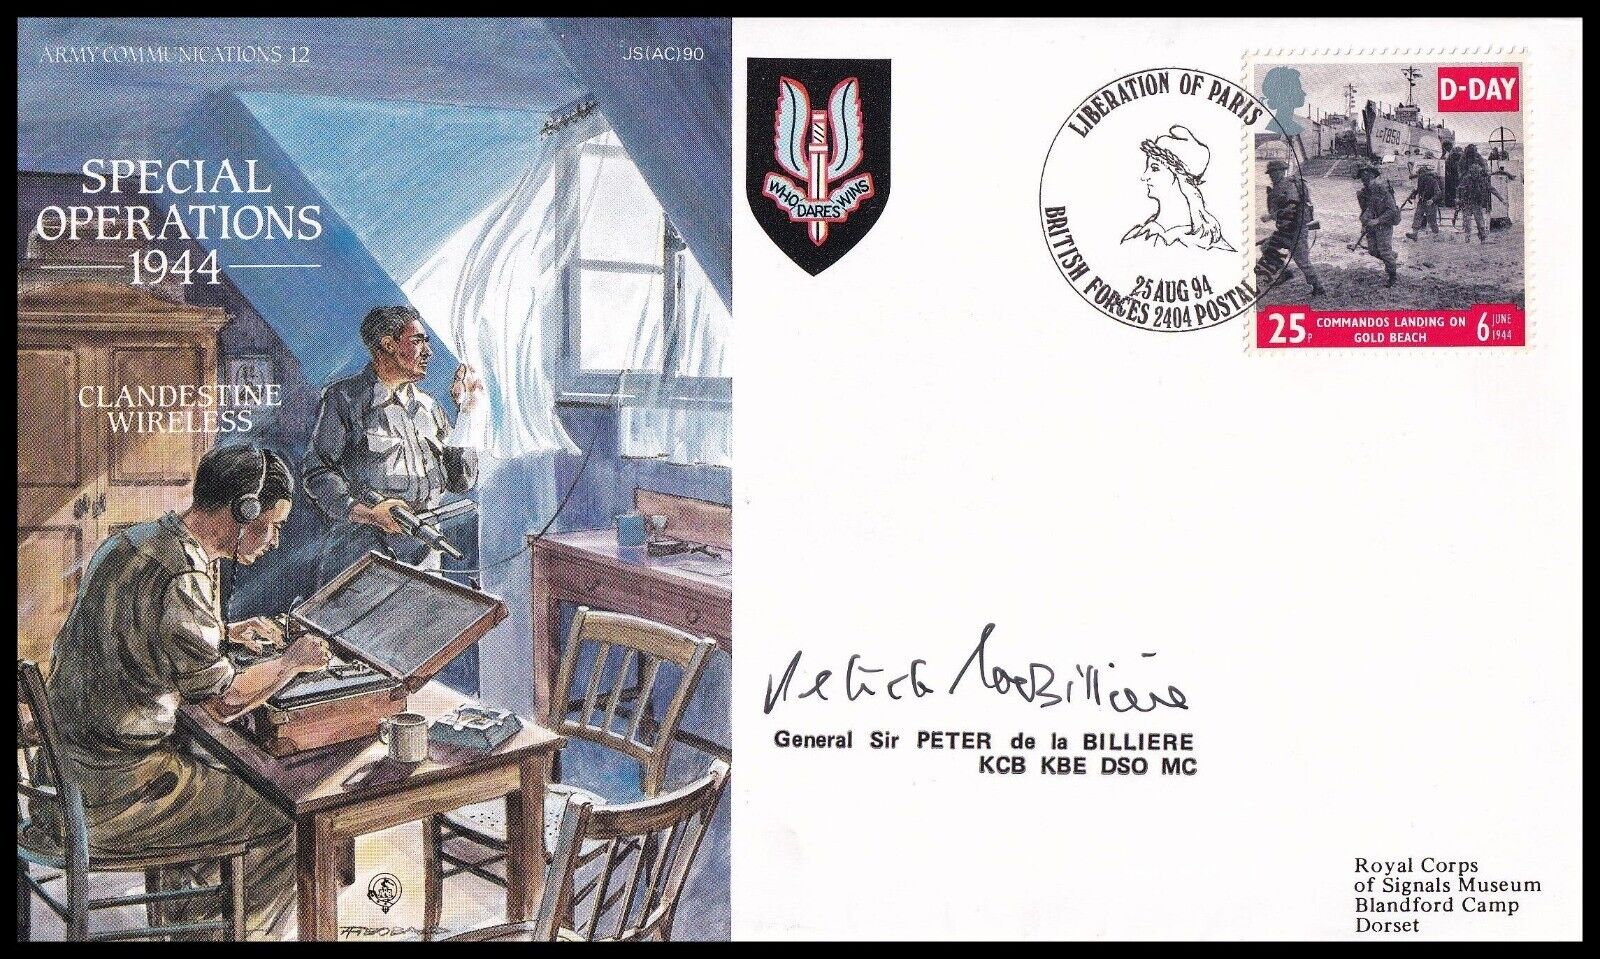 General SIR PETER DE LA BILLIERE Signed Special Operations 1944 RAF AC90 Cover